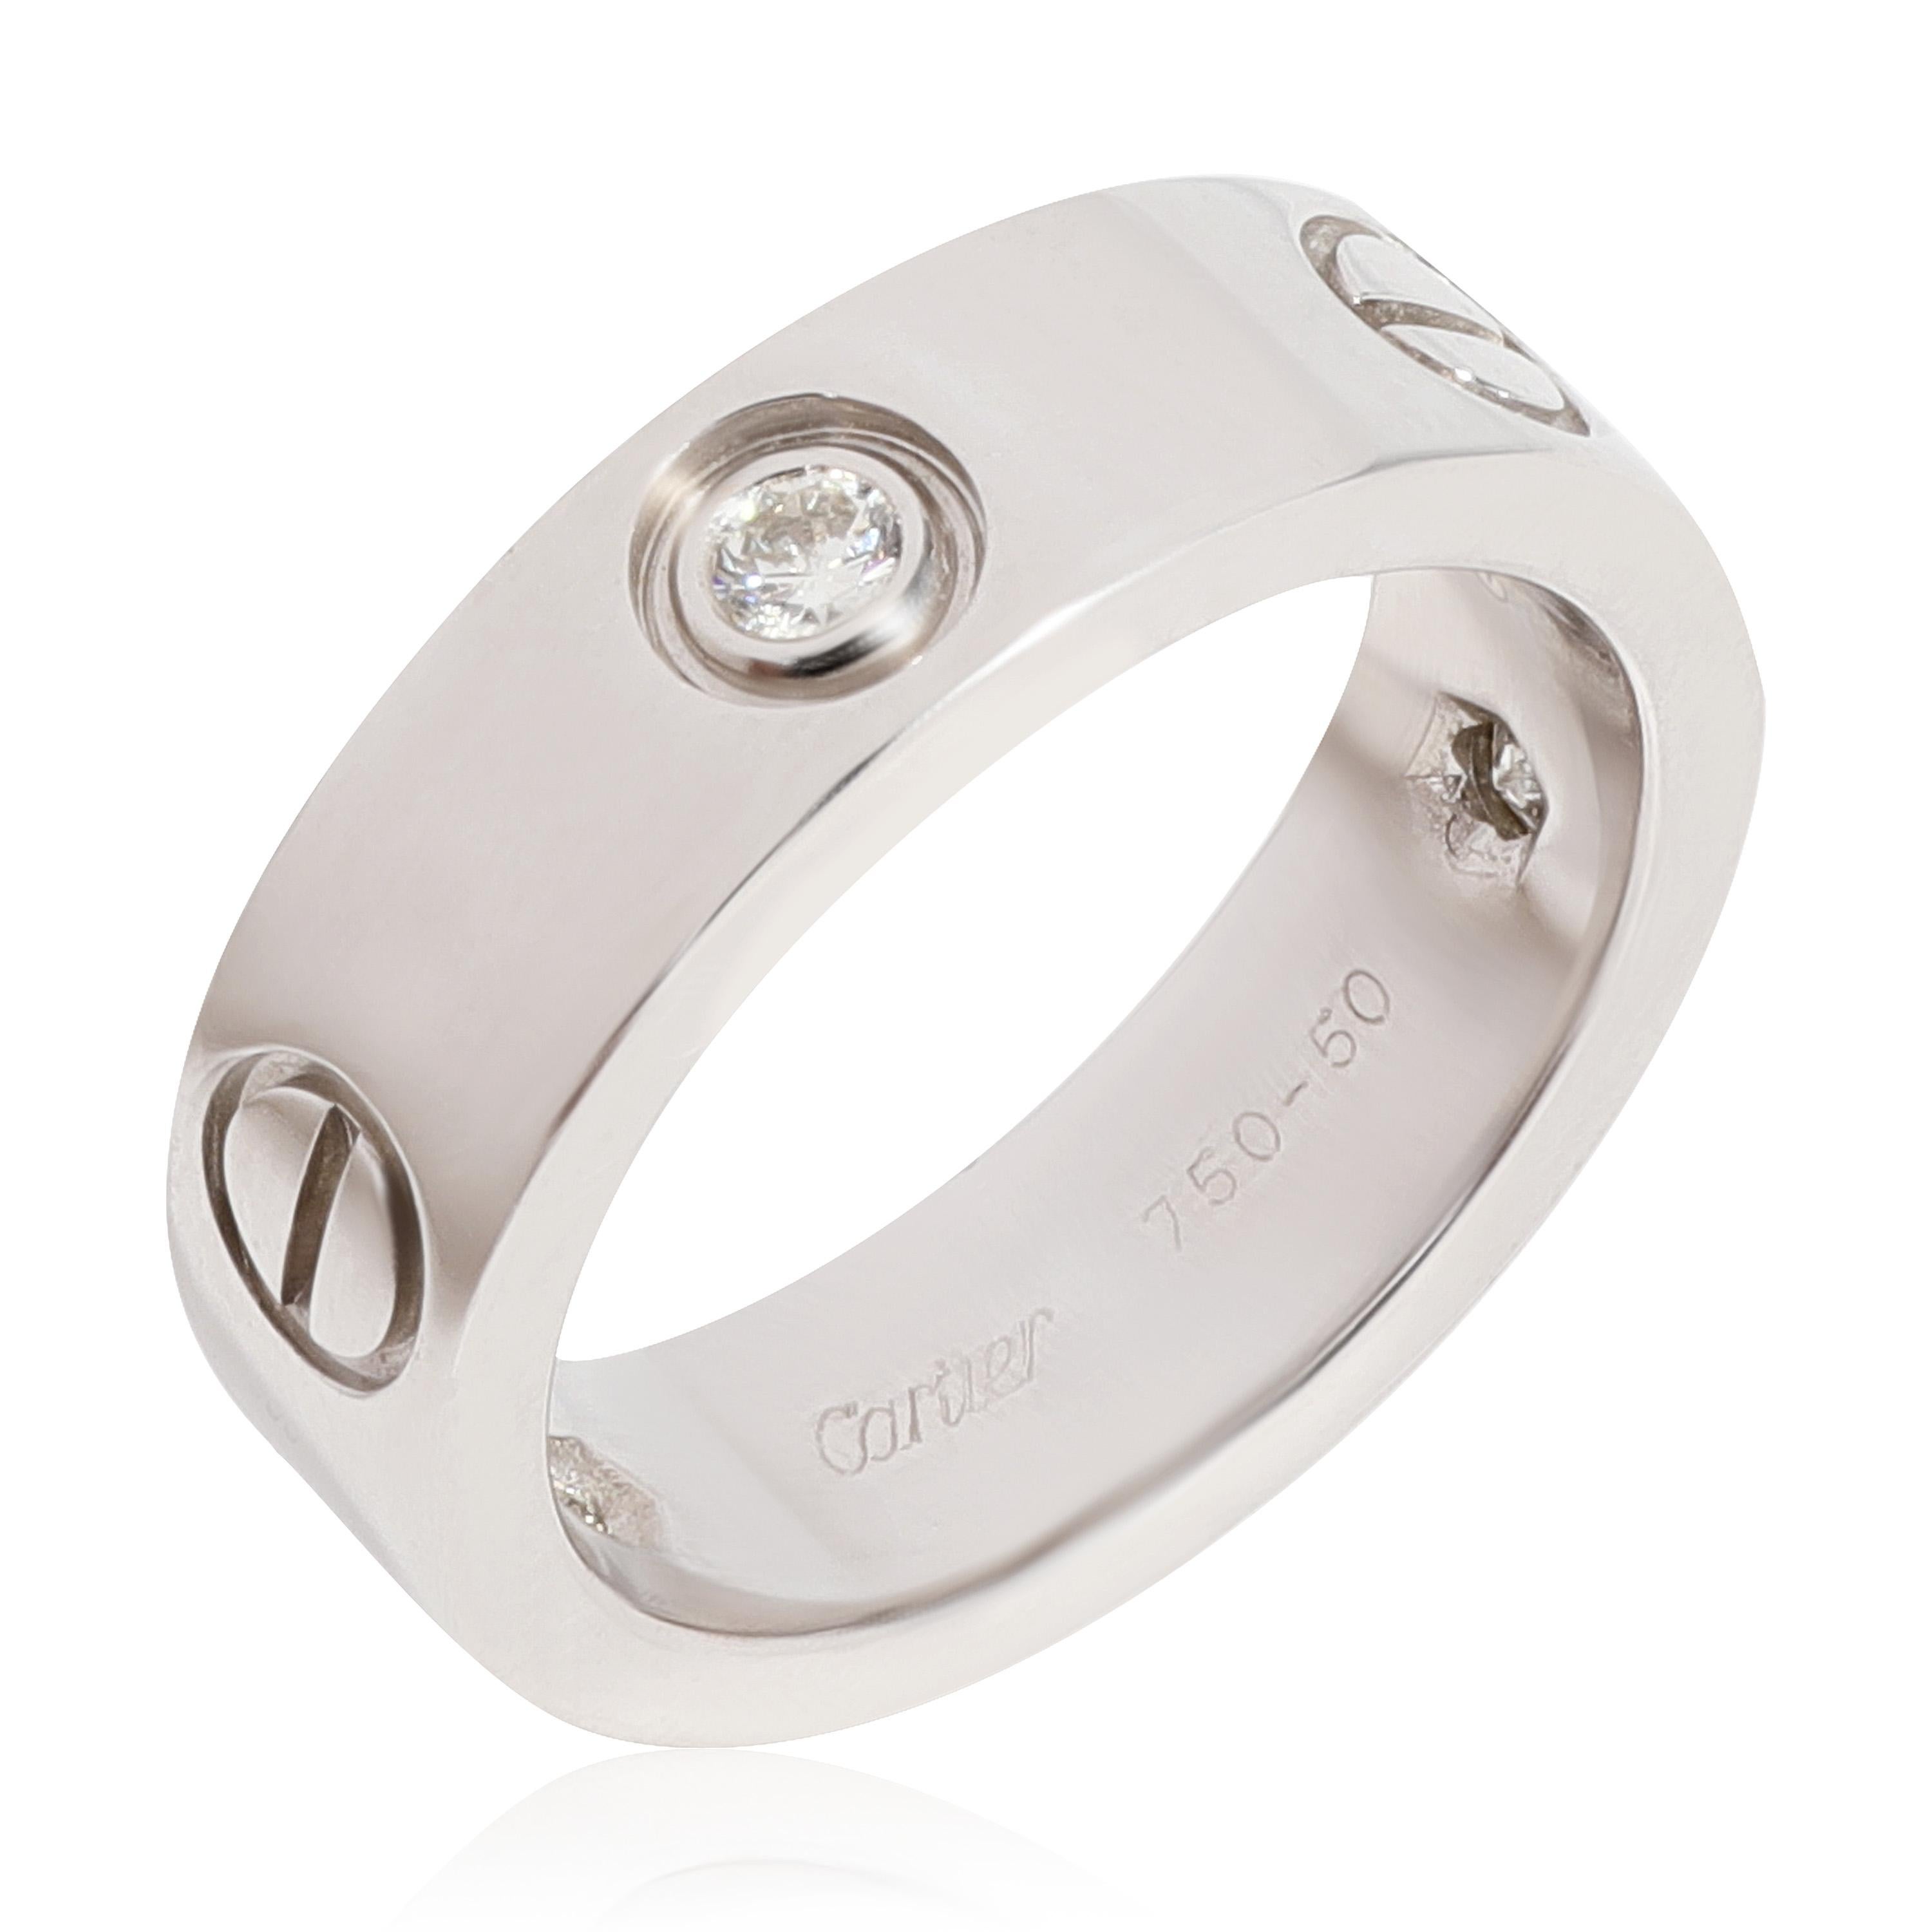 Cartier Love Diamond Ring in 18k White Gold 0.22 CTW

PRIMARY DETAILS
SKU: 118257
Listing Title: Cartier Love Diamond Ring in 18k White Gold 0.22 CTW
Condition Description: Retails for 4100 USD. In excellent condition and recently polished. Ring